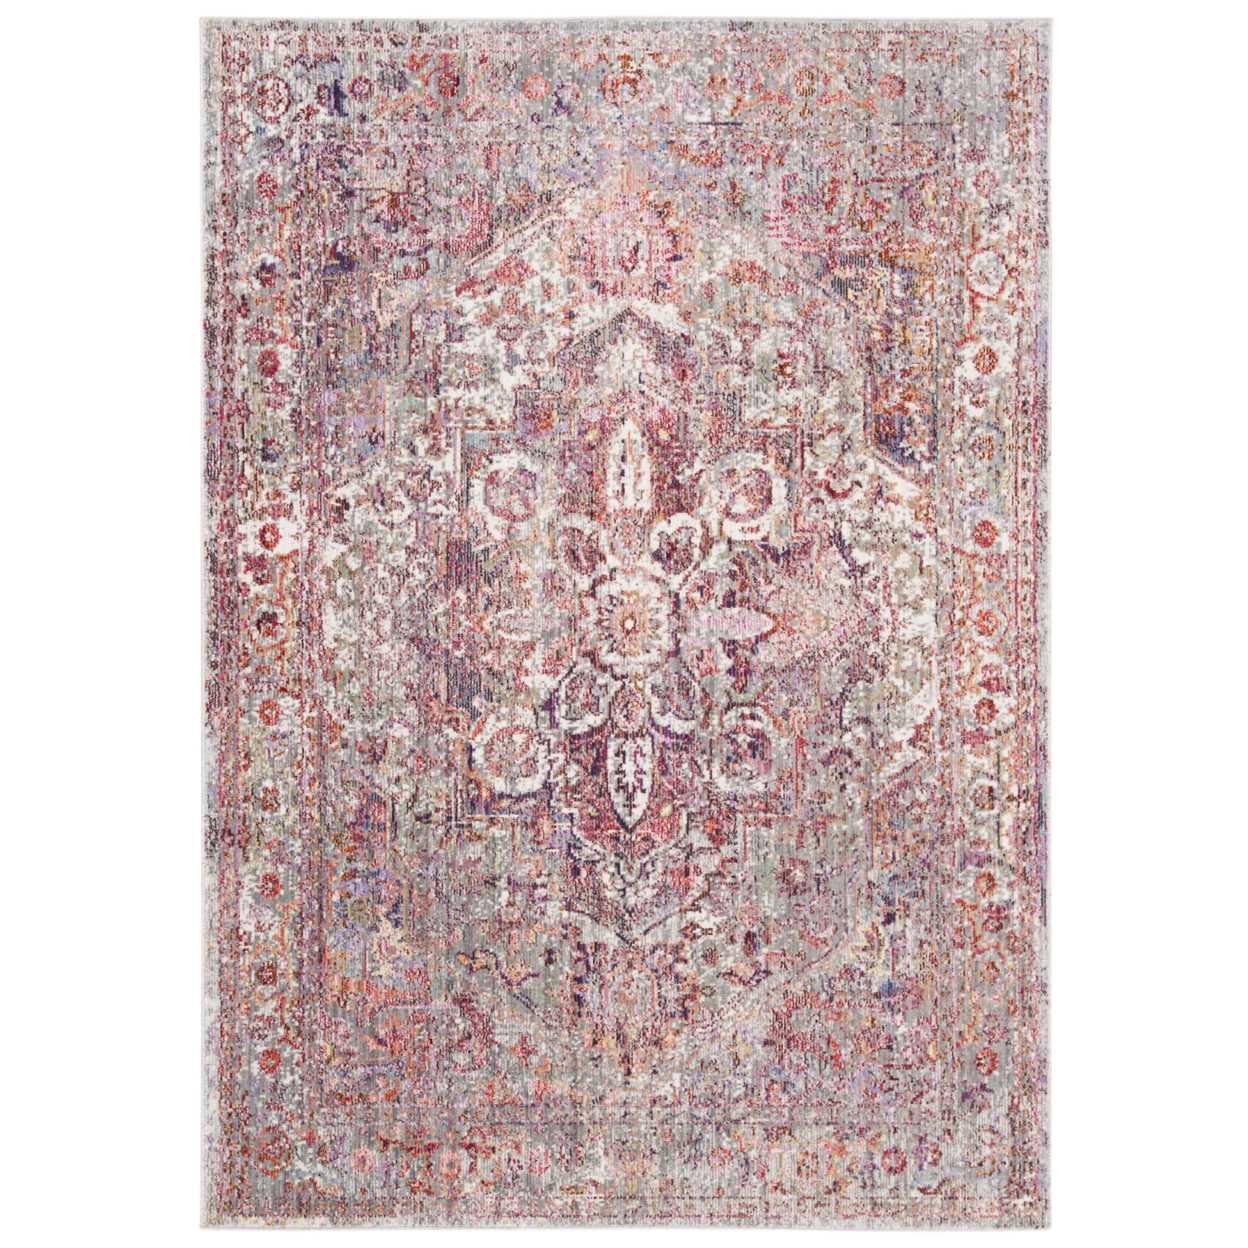 SAFAVIEH Valencia Collection VAL163S Ivory / Red Rug - 4' X 5' 7